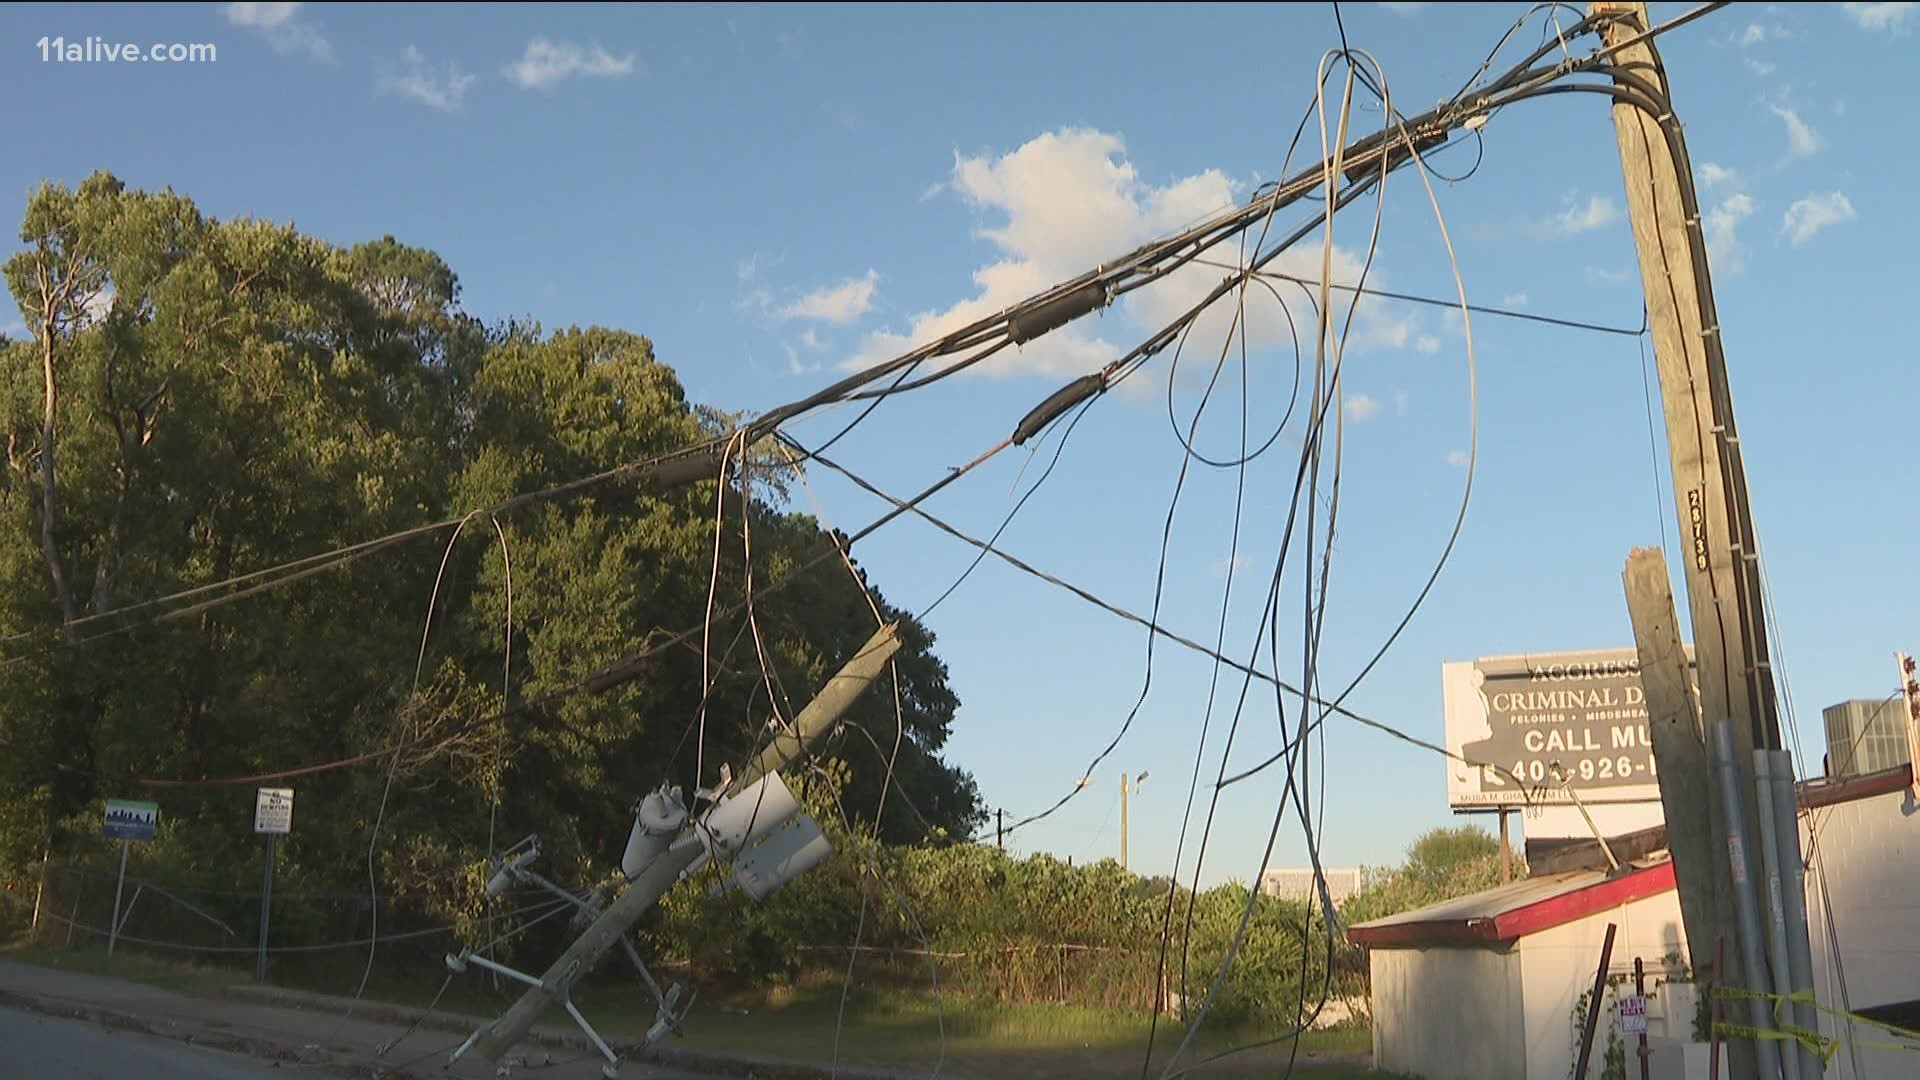 It could take power crews until Sunday to restore power to 95% of customers who lost it in Tropical Storm Zeta.